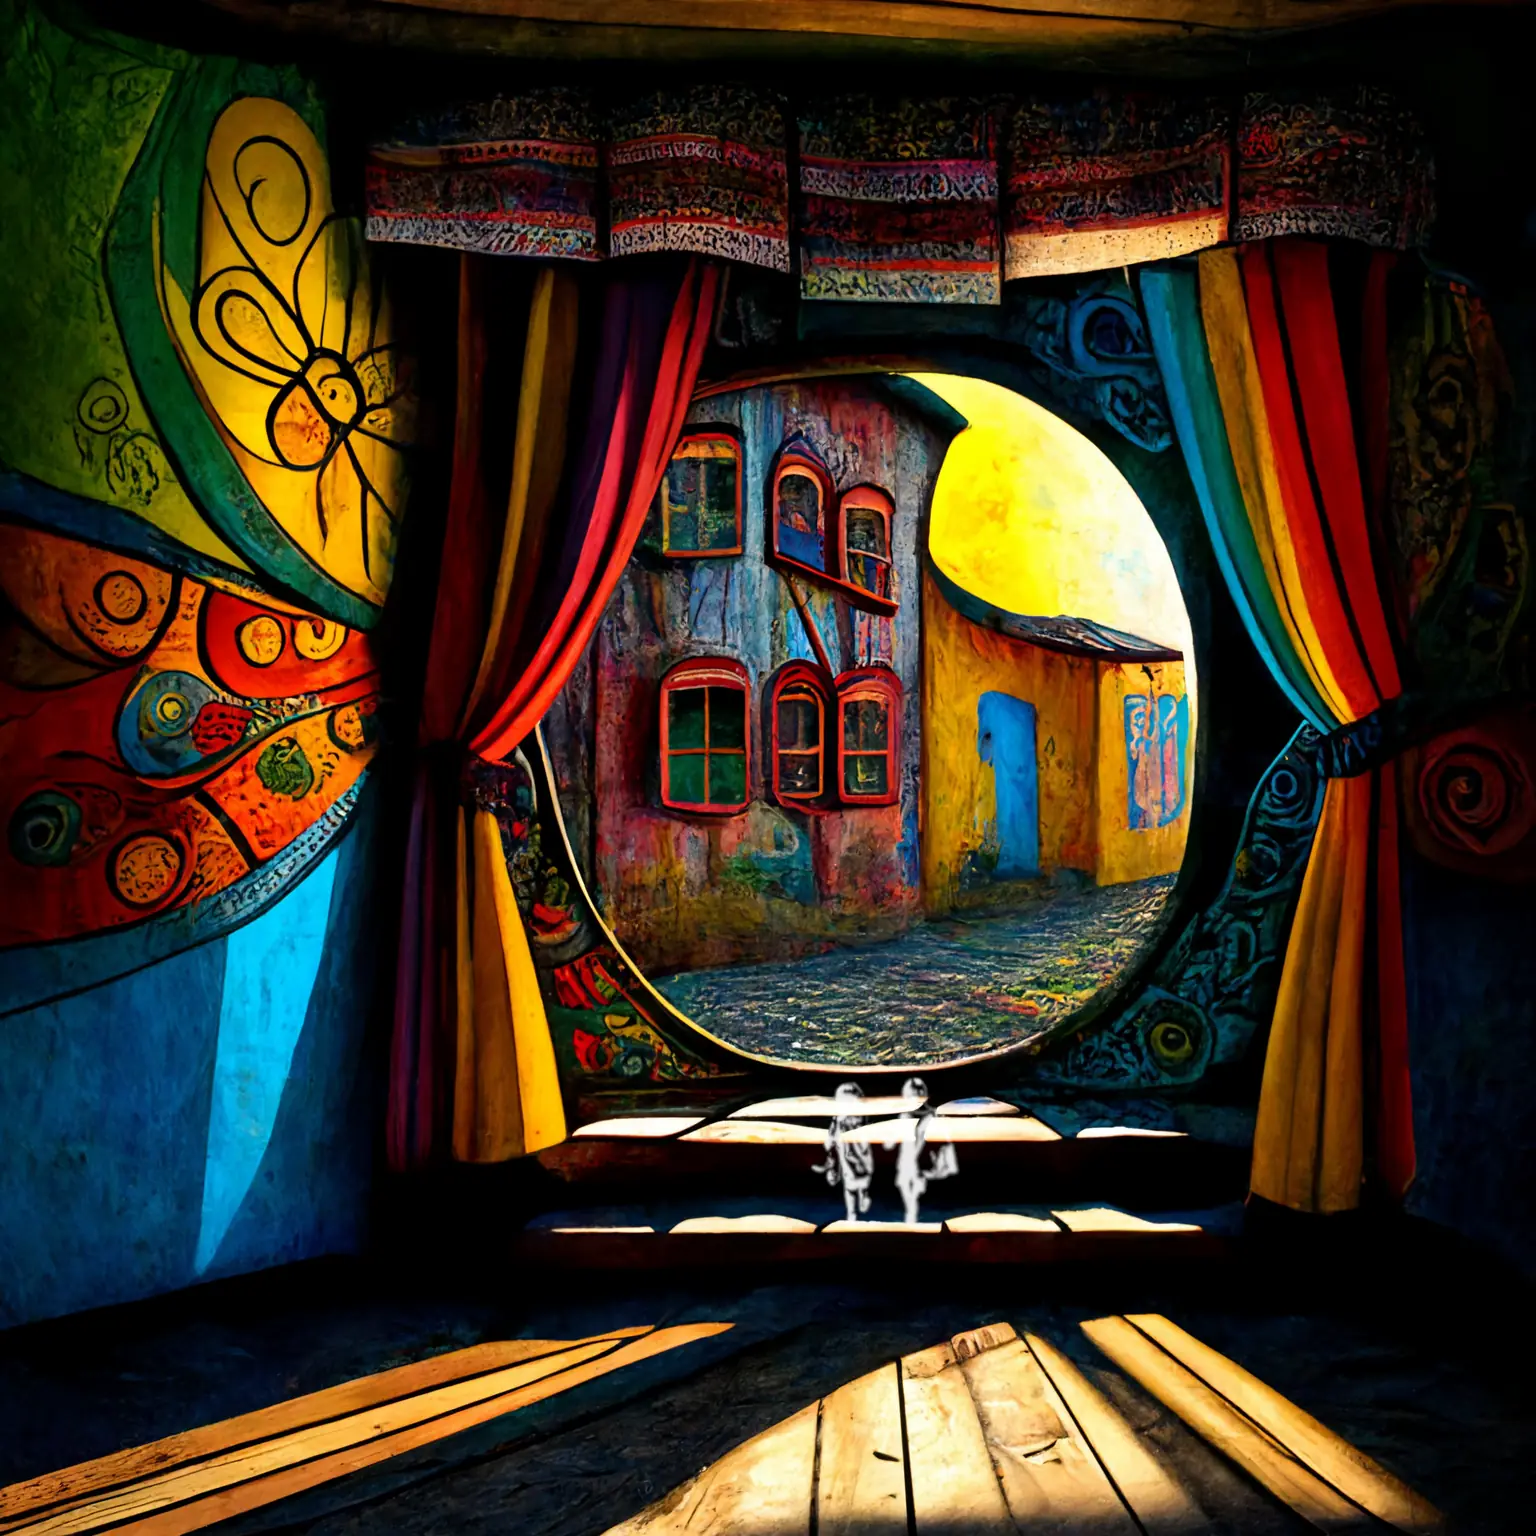 A colourful artistic rendering of some steps leading out of a building onto a cobblestone path. The exit is a round opening in the wall that is framed by curtains drawn and tied.